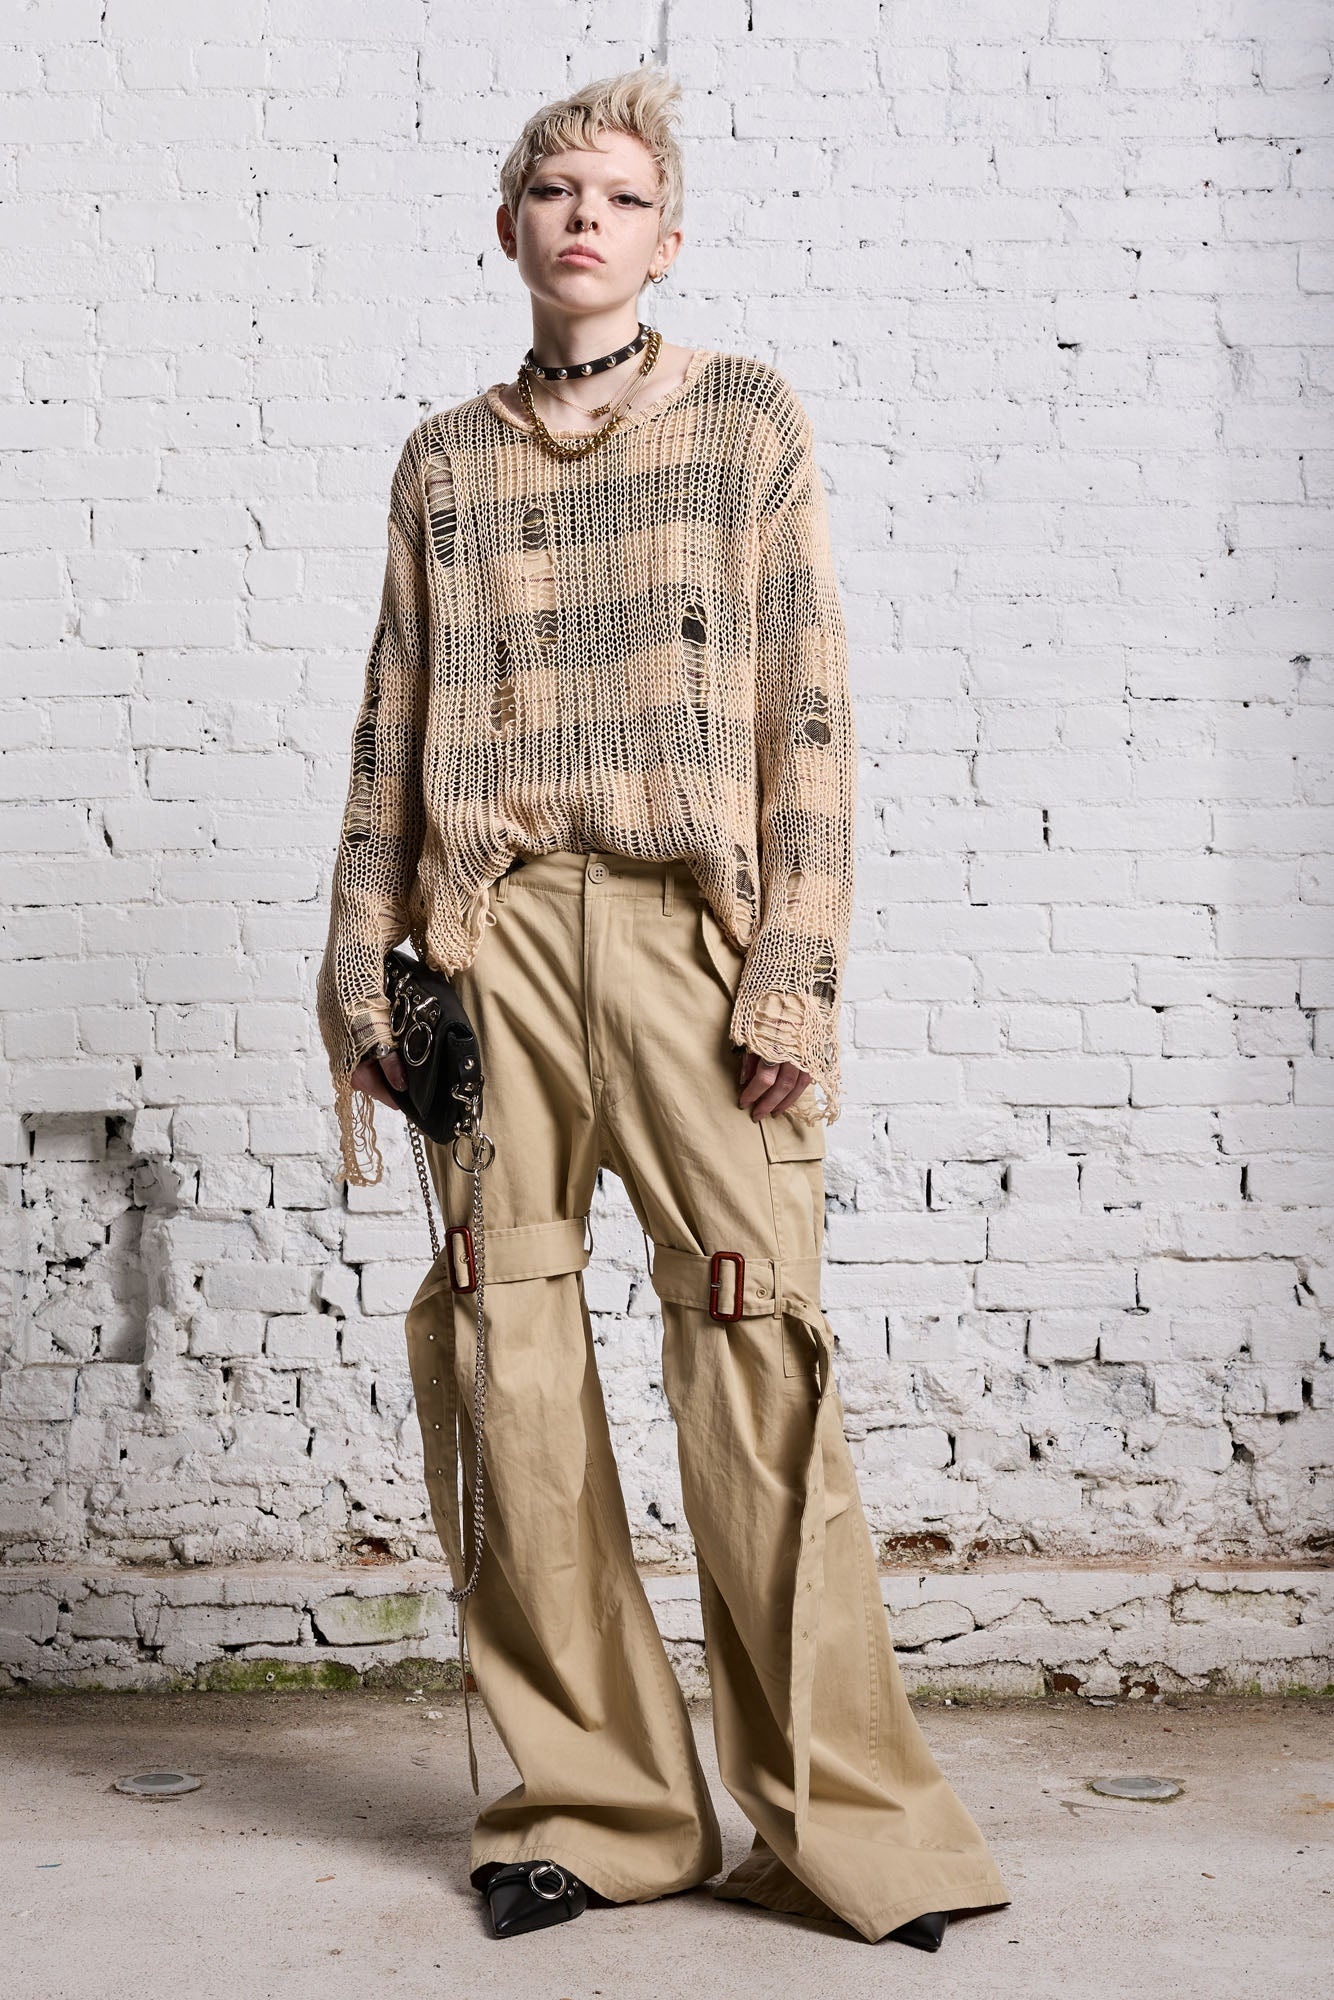 RELAXED OVERLAY CREWNECK - CREAM AND BLACK PLAID - 3